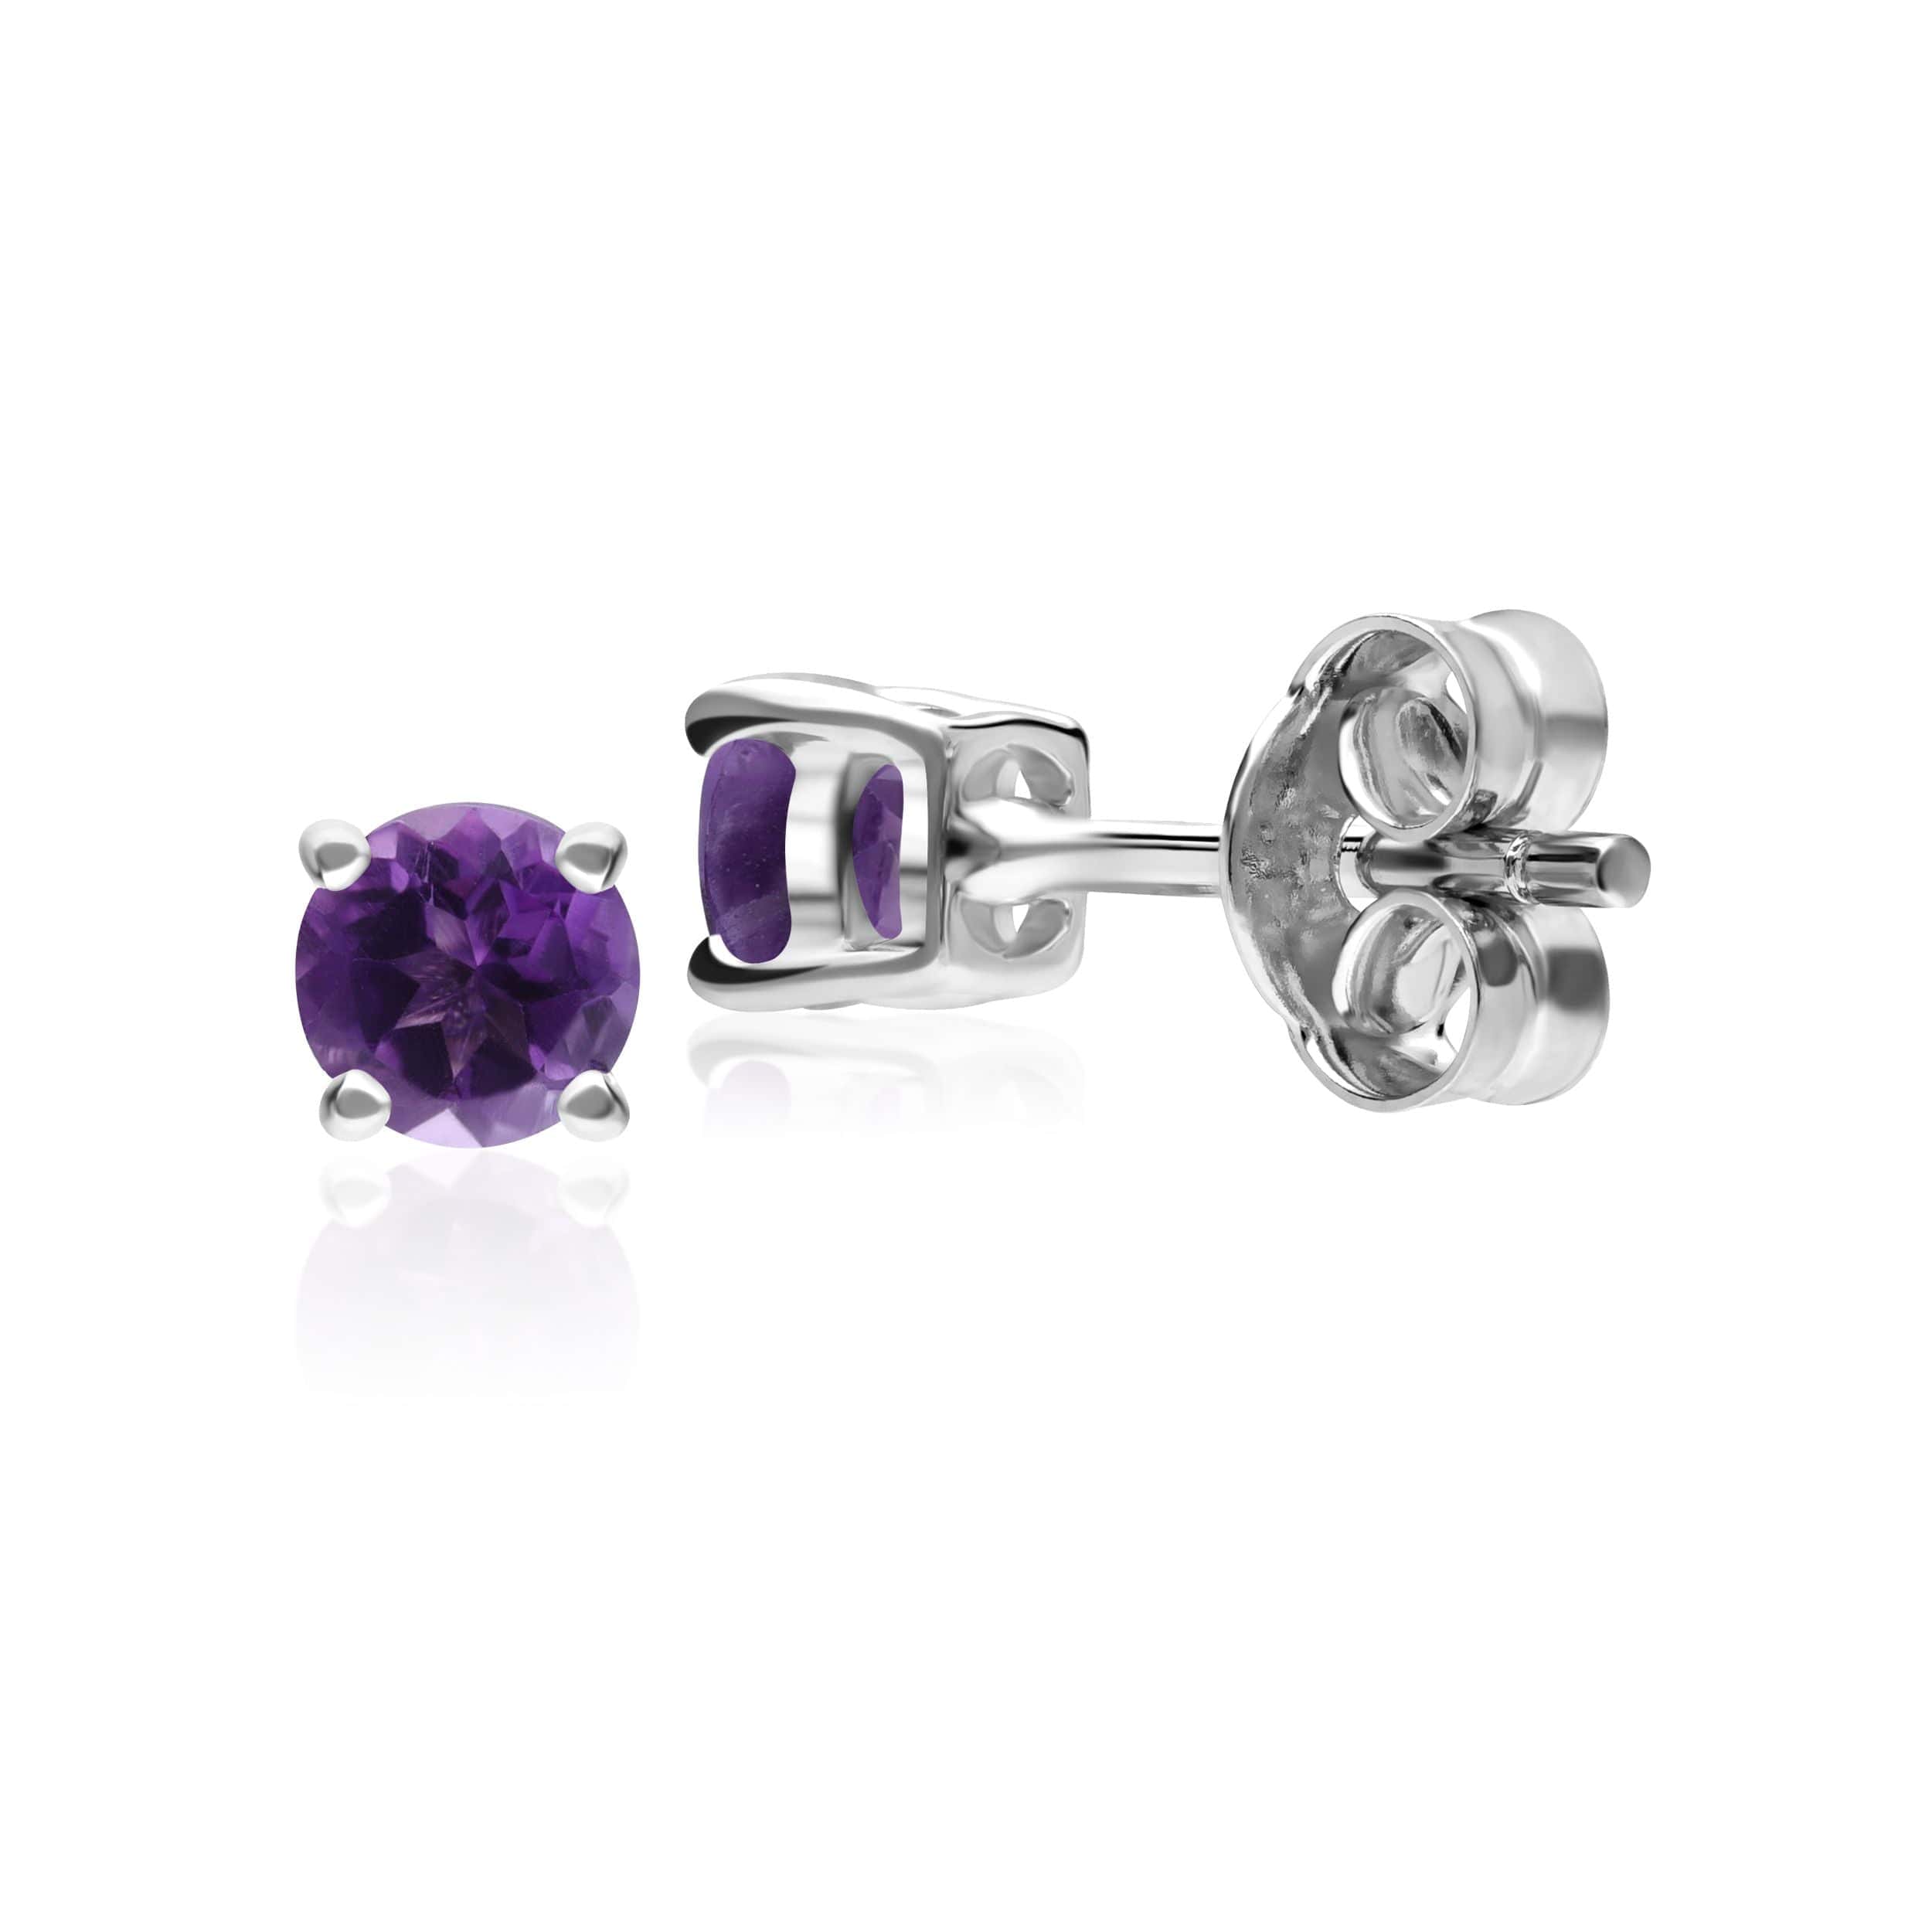 11612 Classic Round Amethyst Stud Earrings in 9ct White Gold 3.5mm 2